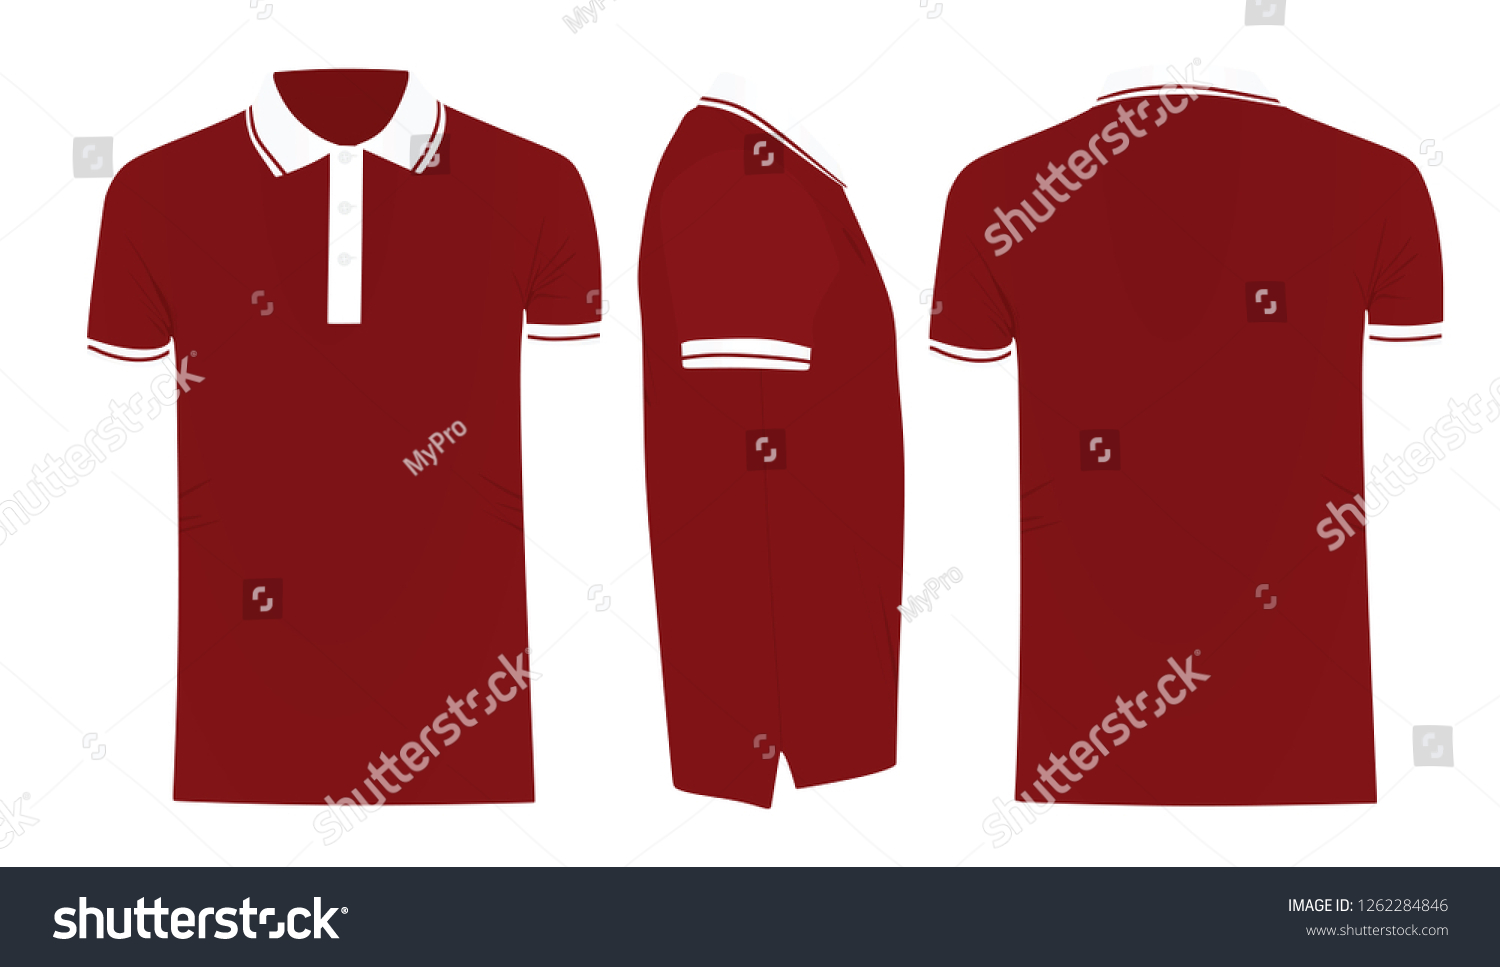 red-polo-t-shirt-template-vector-stock-vector-royalty-free-1262284846